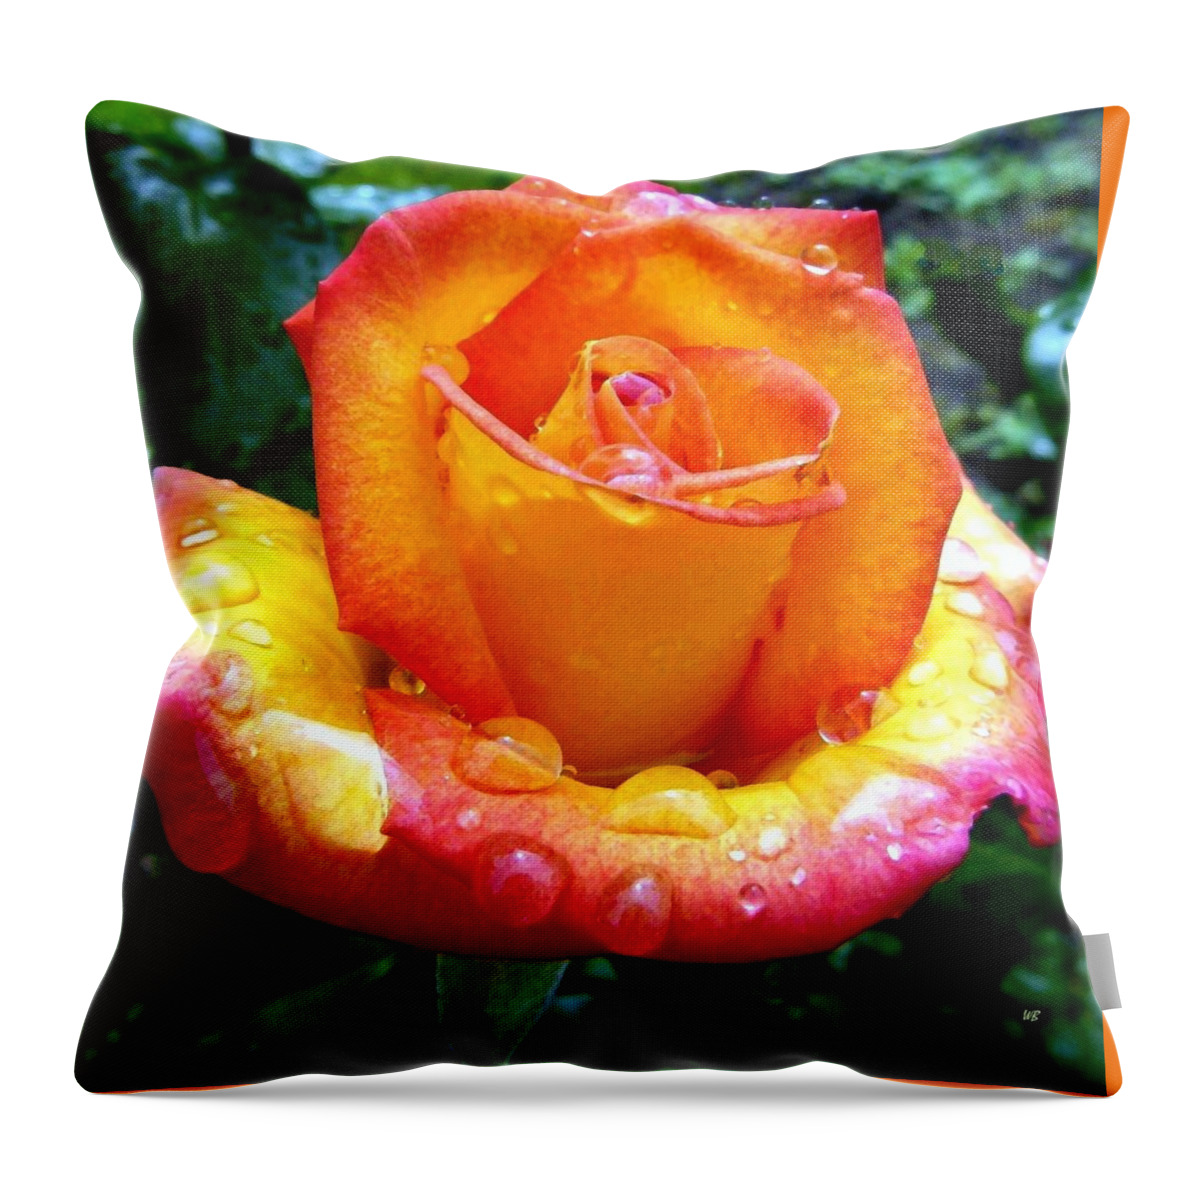 Red Gold Rose Throw Pillow featuring the photograph The Red Gold Rose by Will Borden